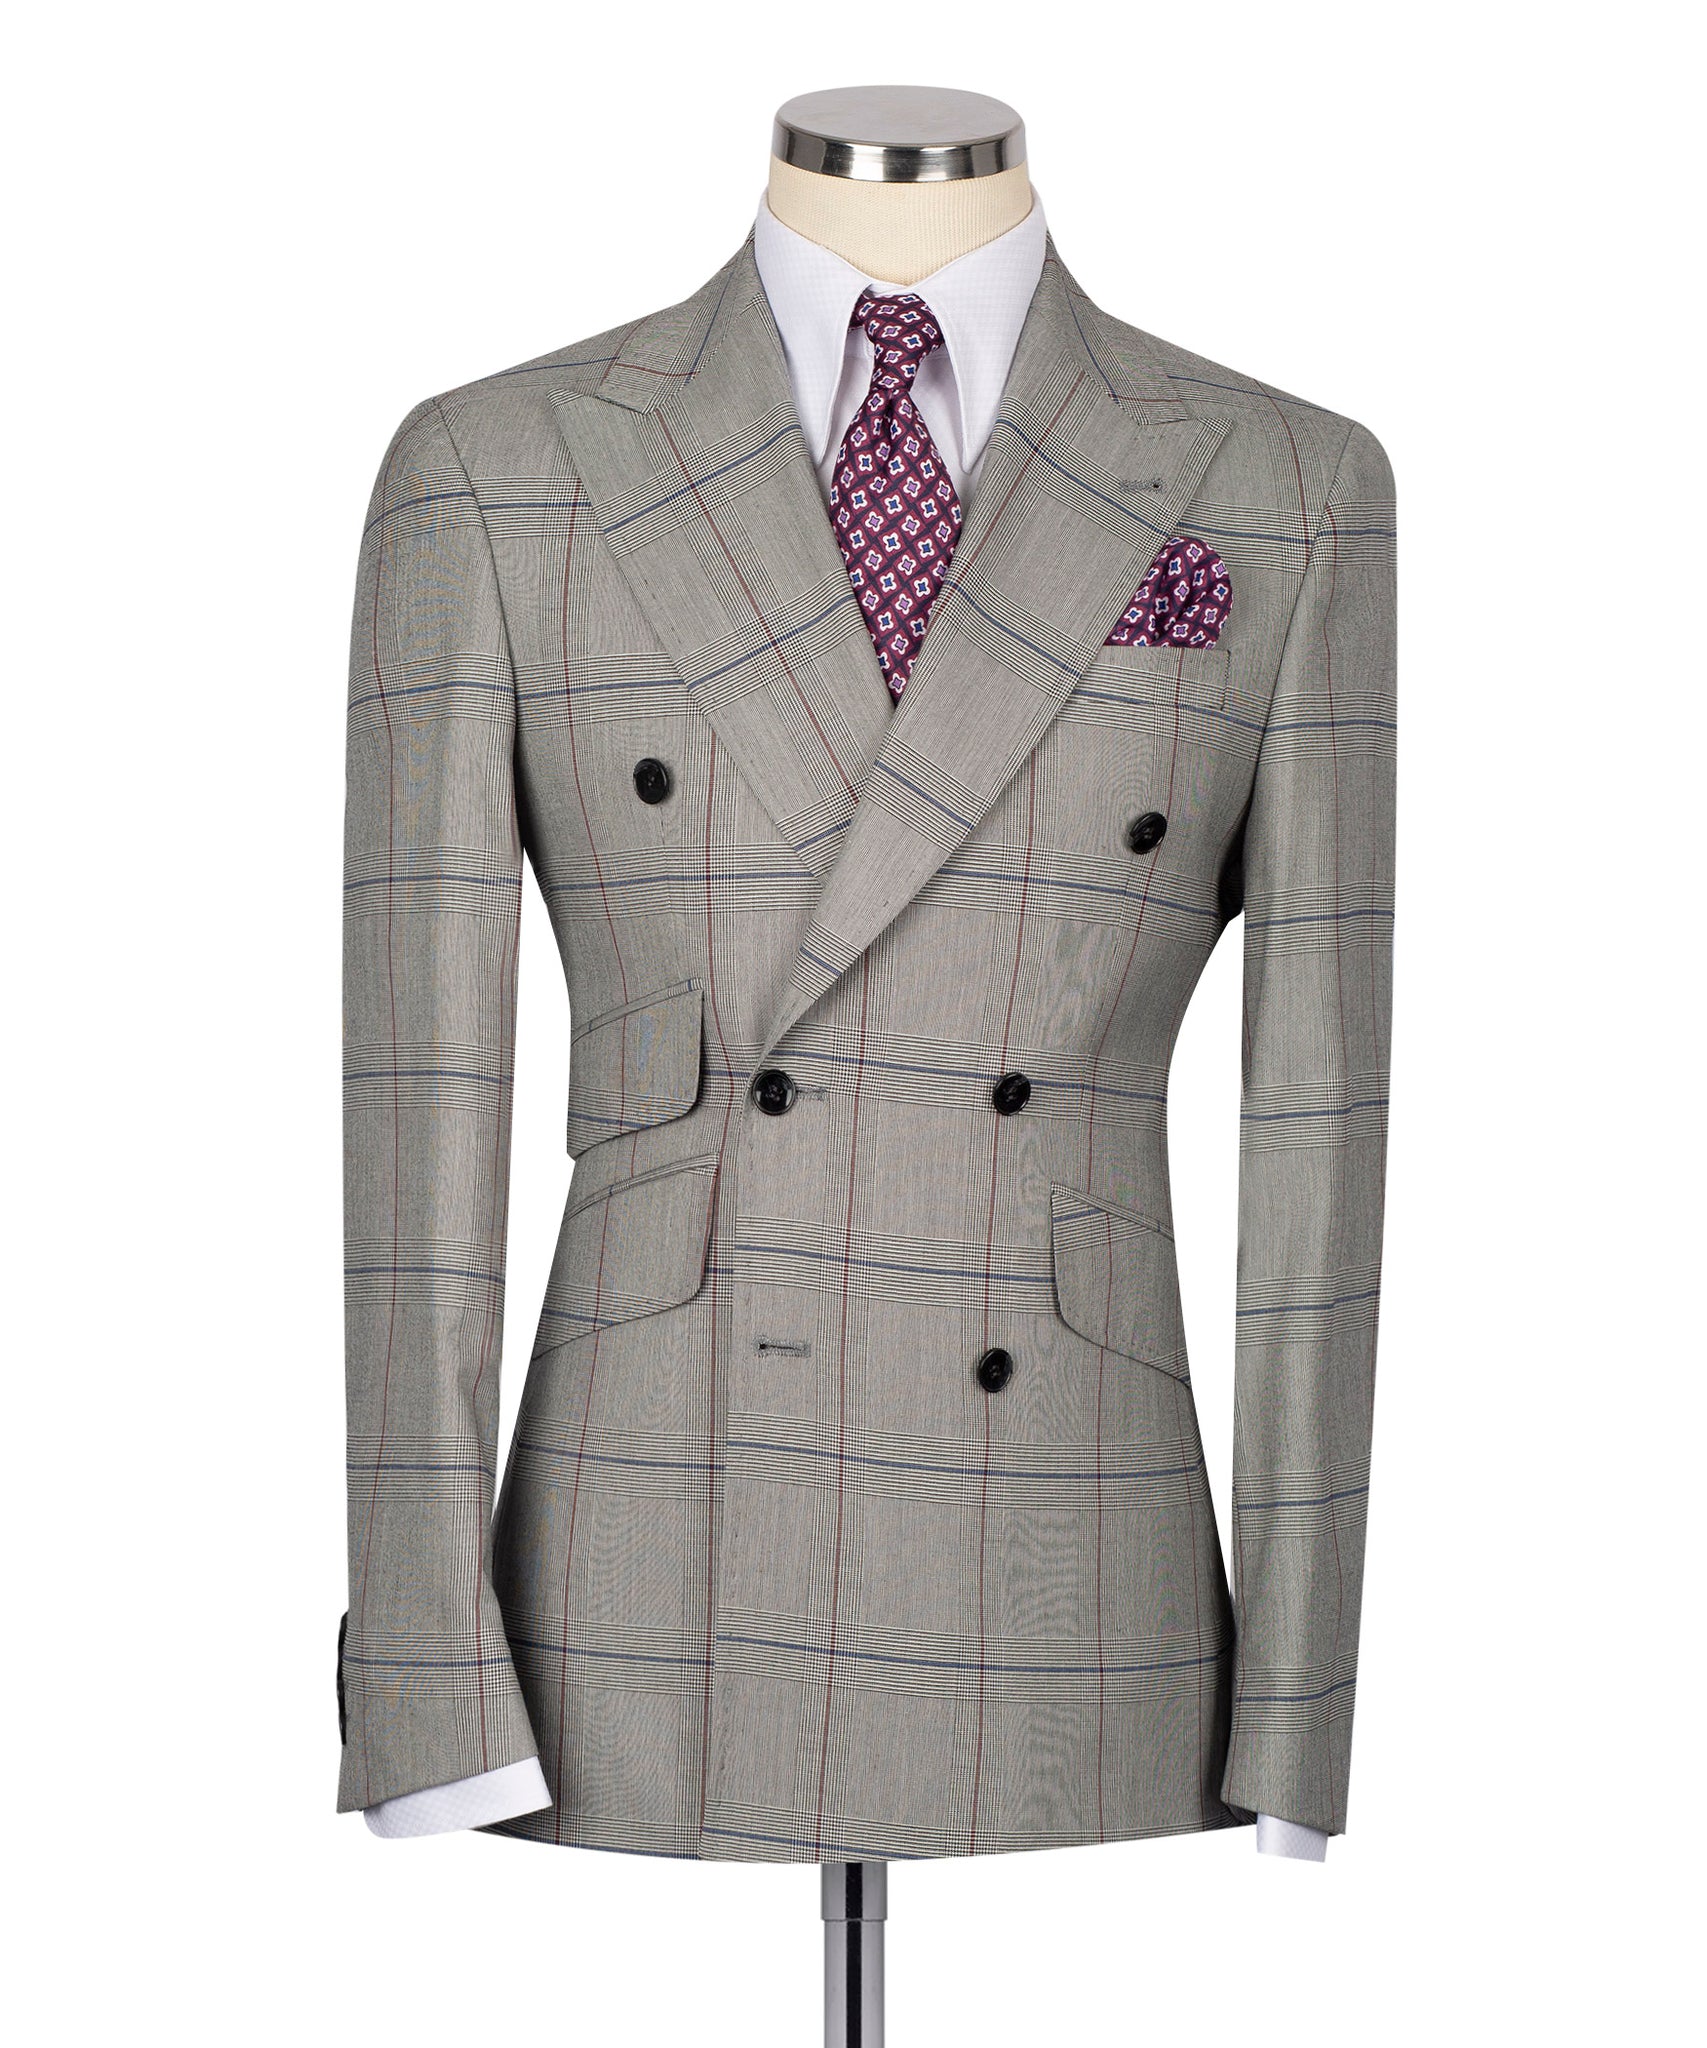 DOUBLE BREASTED GRAY MEN'S SUIT